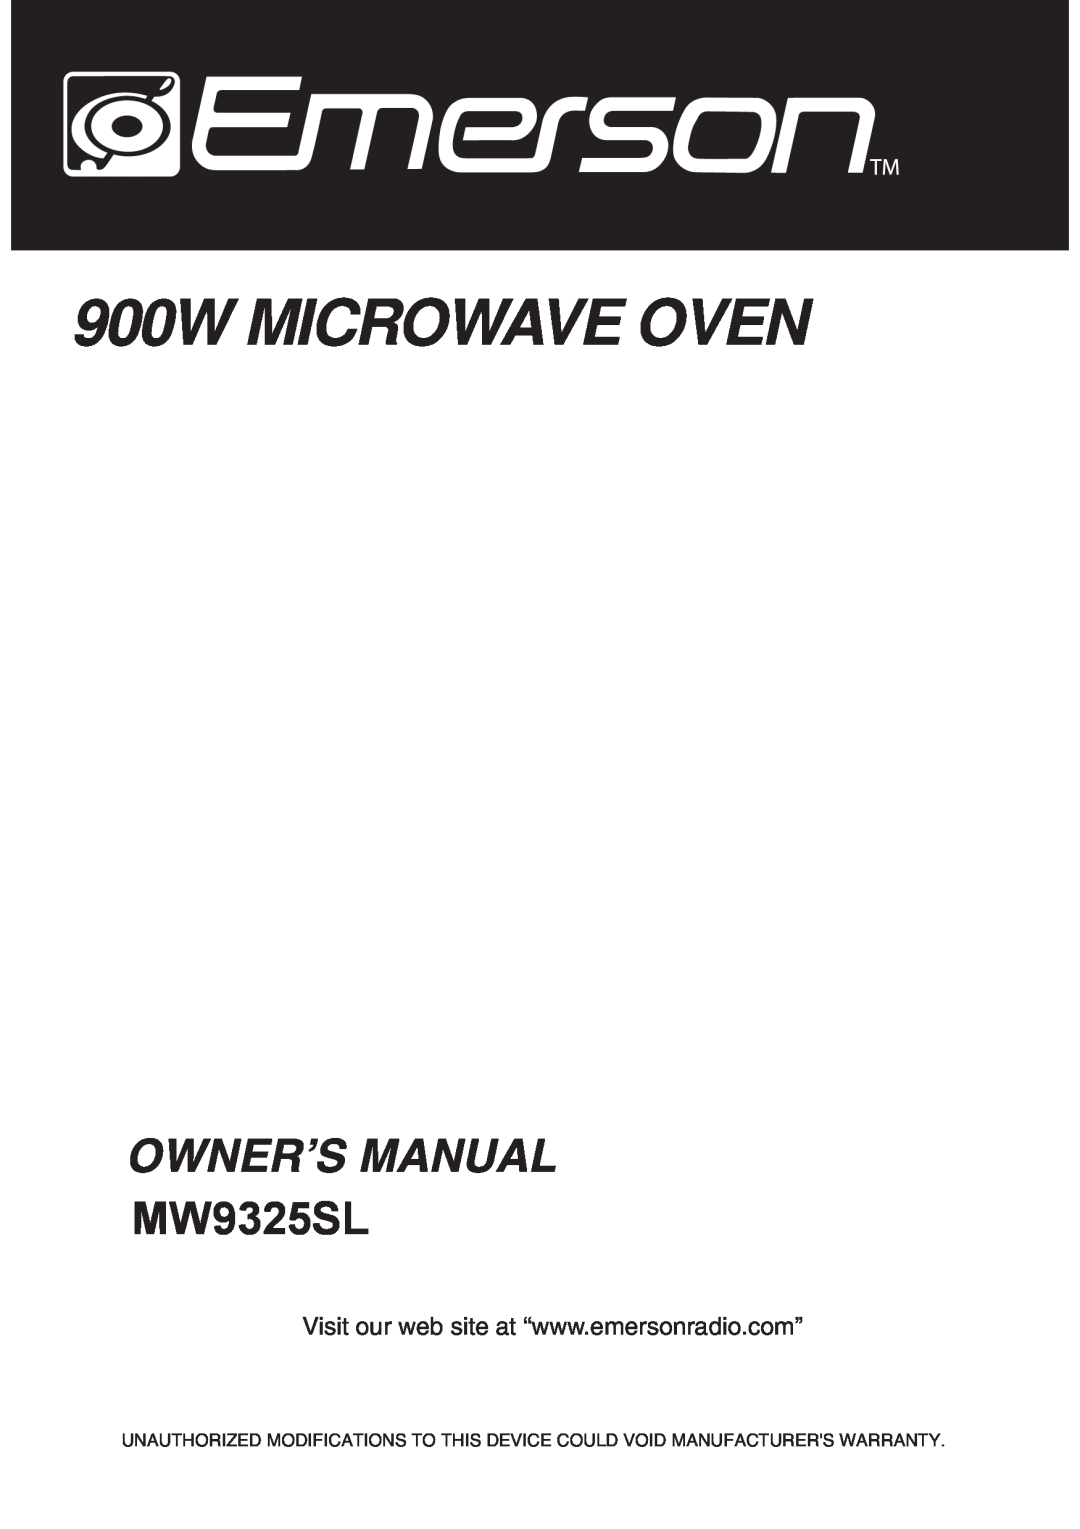 Emerson MW9325SL owner manual 900W MICROWAVE OVEN, Owner’S Manual 